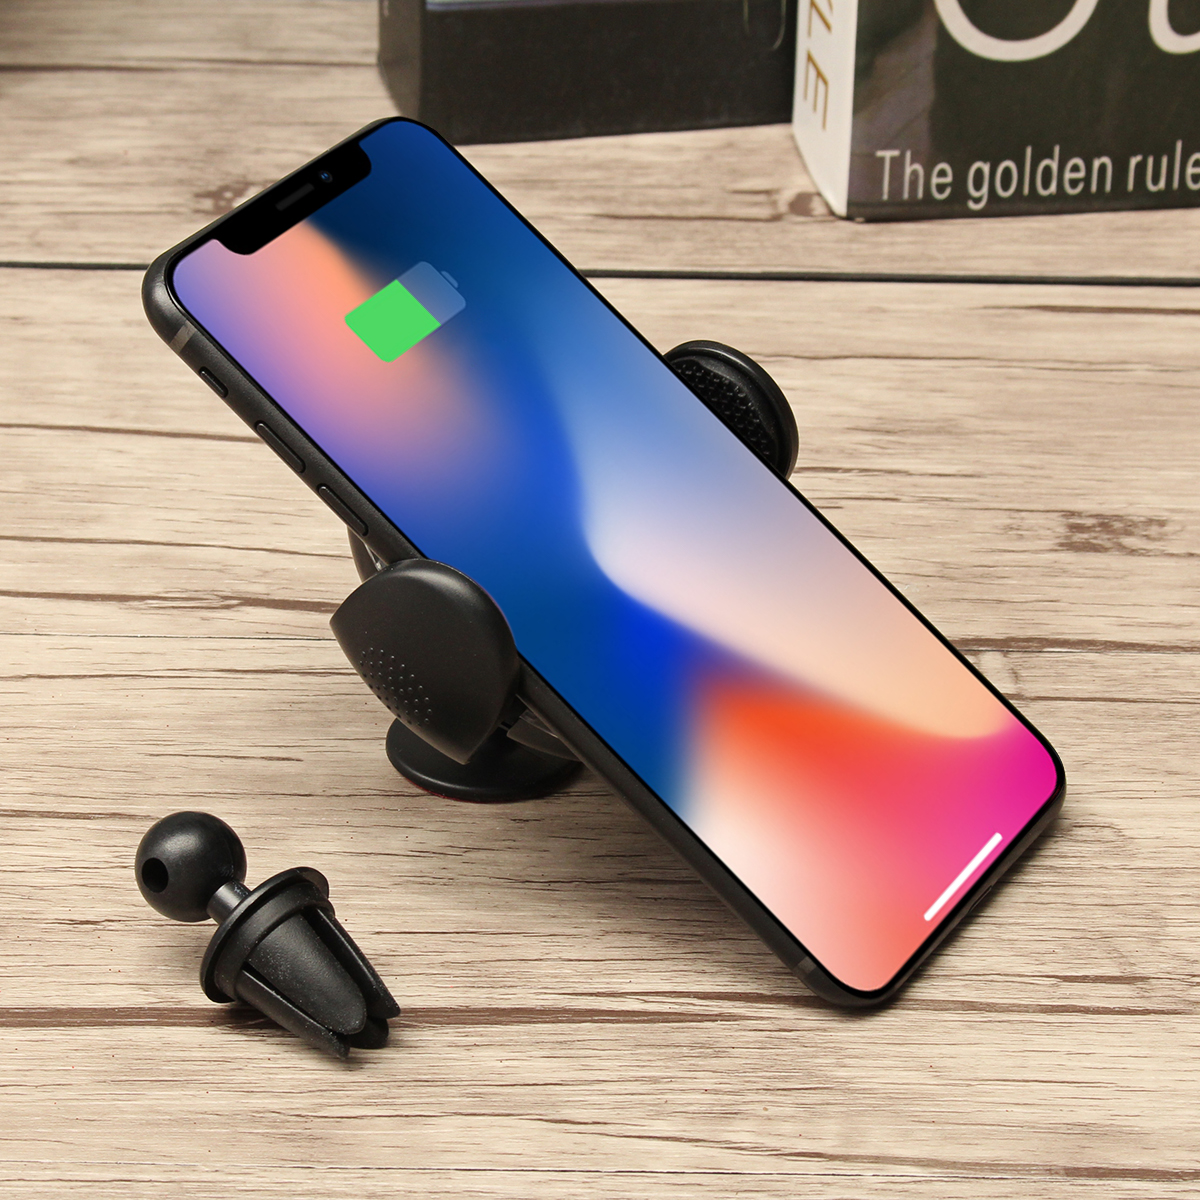 Bakeey-Wireless-Fast-Car-Charger-Two-Mount-Holder-Stand-For-iPhone-8P-iPhone-X-Samsung-S8-1252095-8